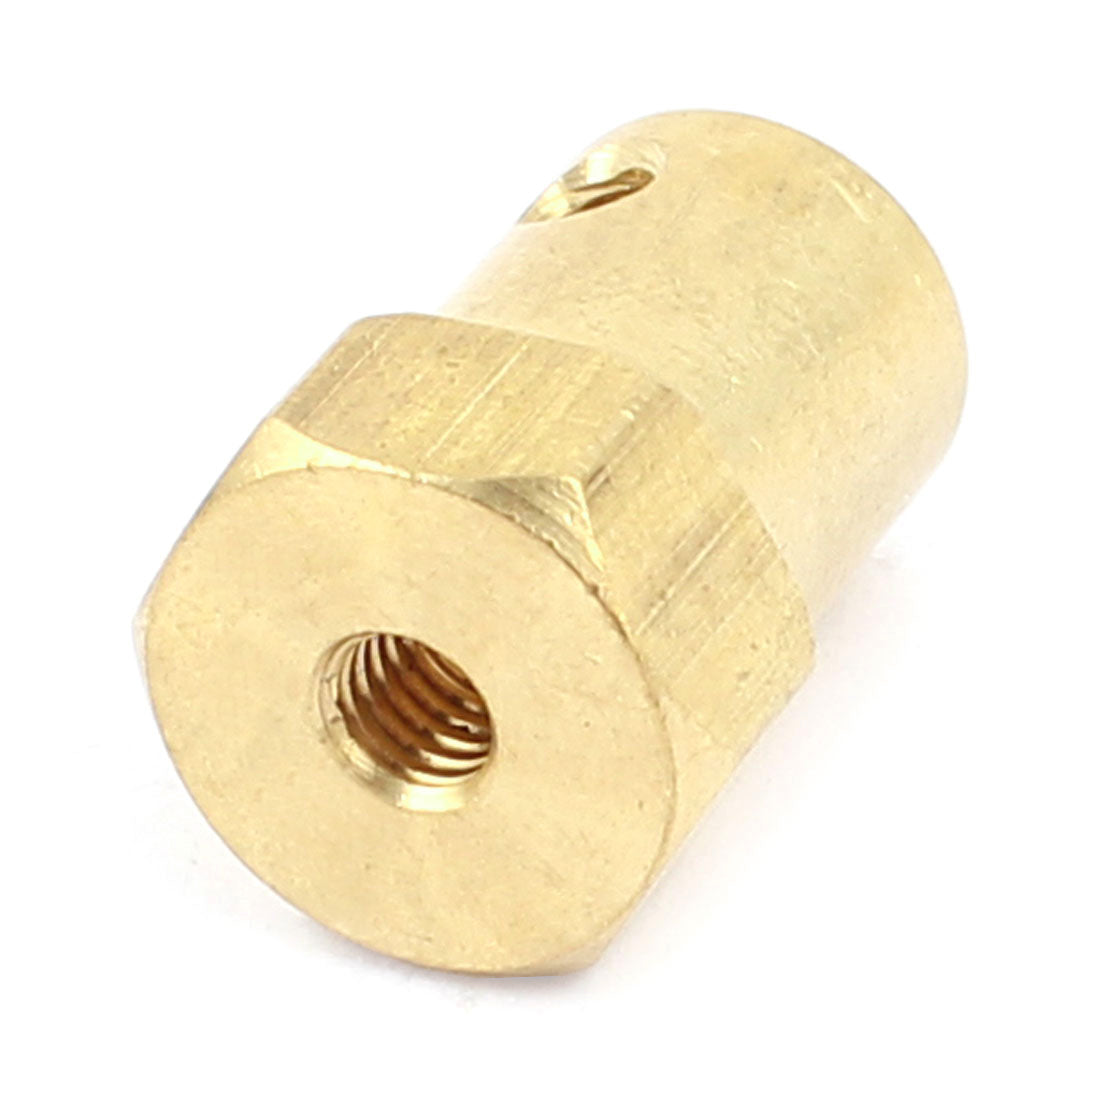 Coupling 3mm Hexagon Brass for Motor Shafts and Wheels